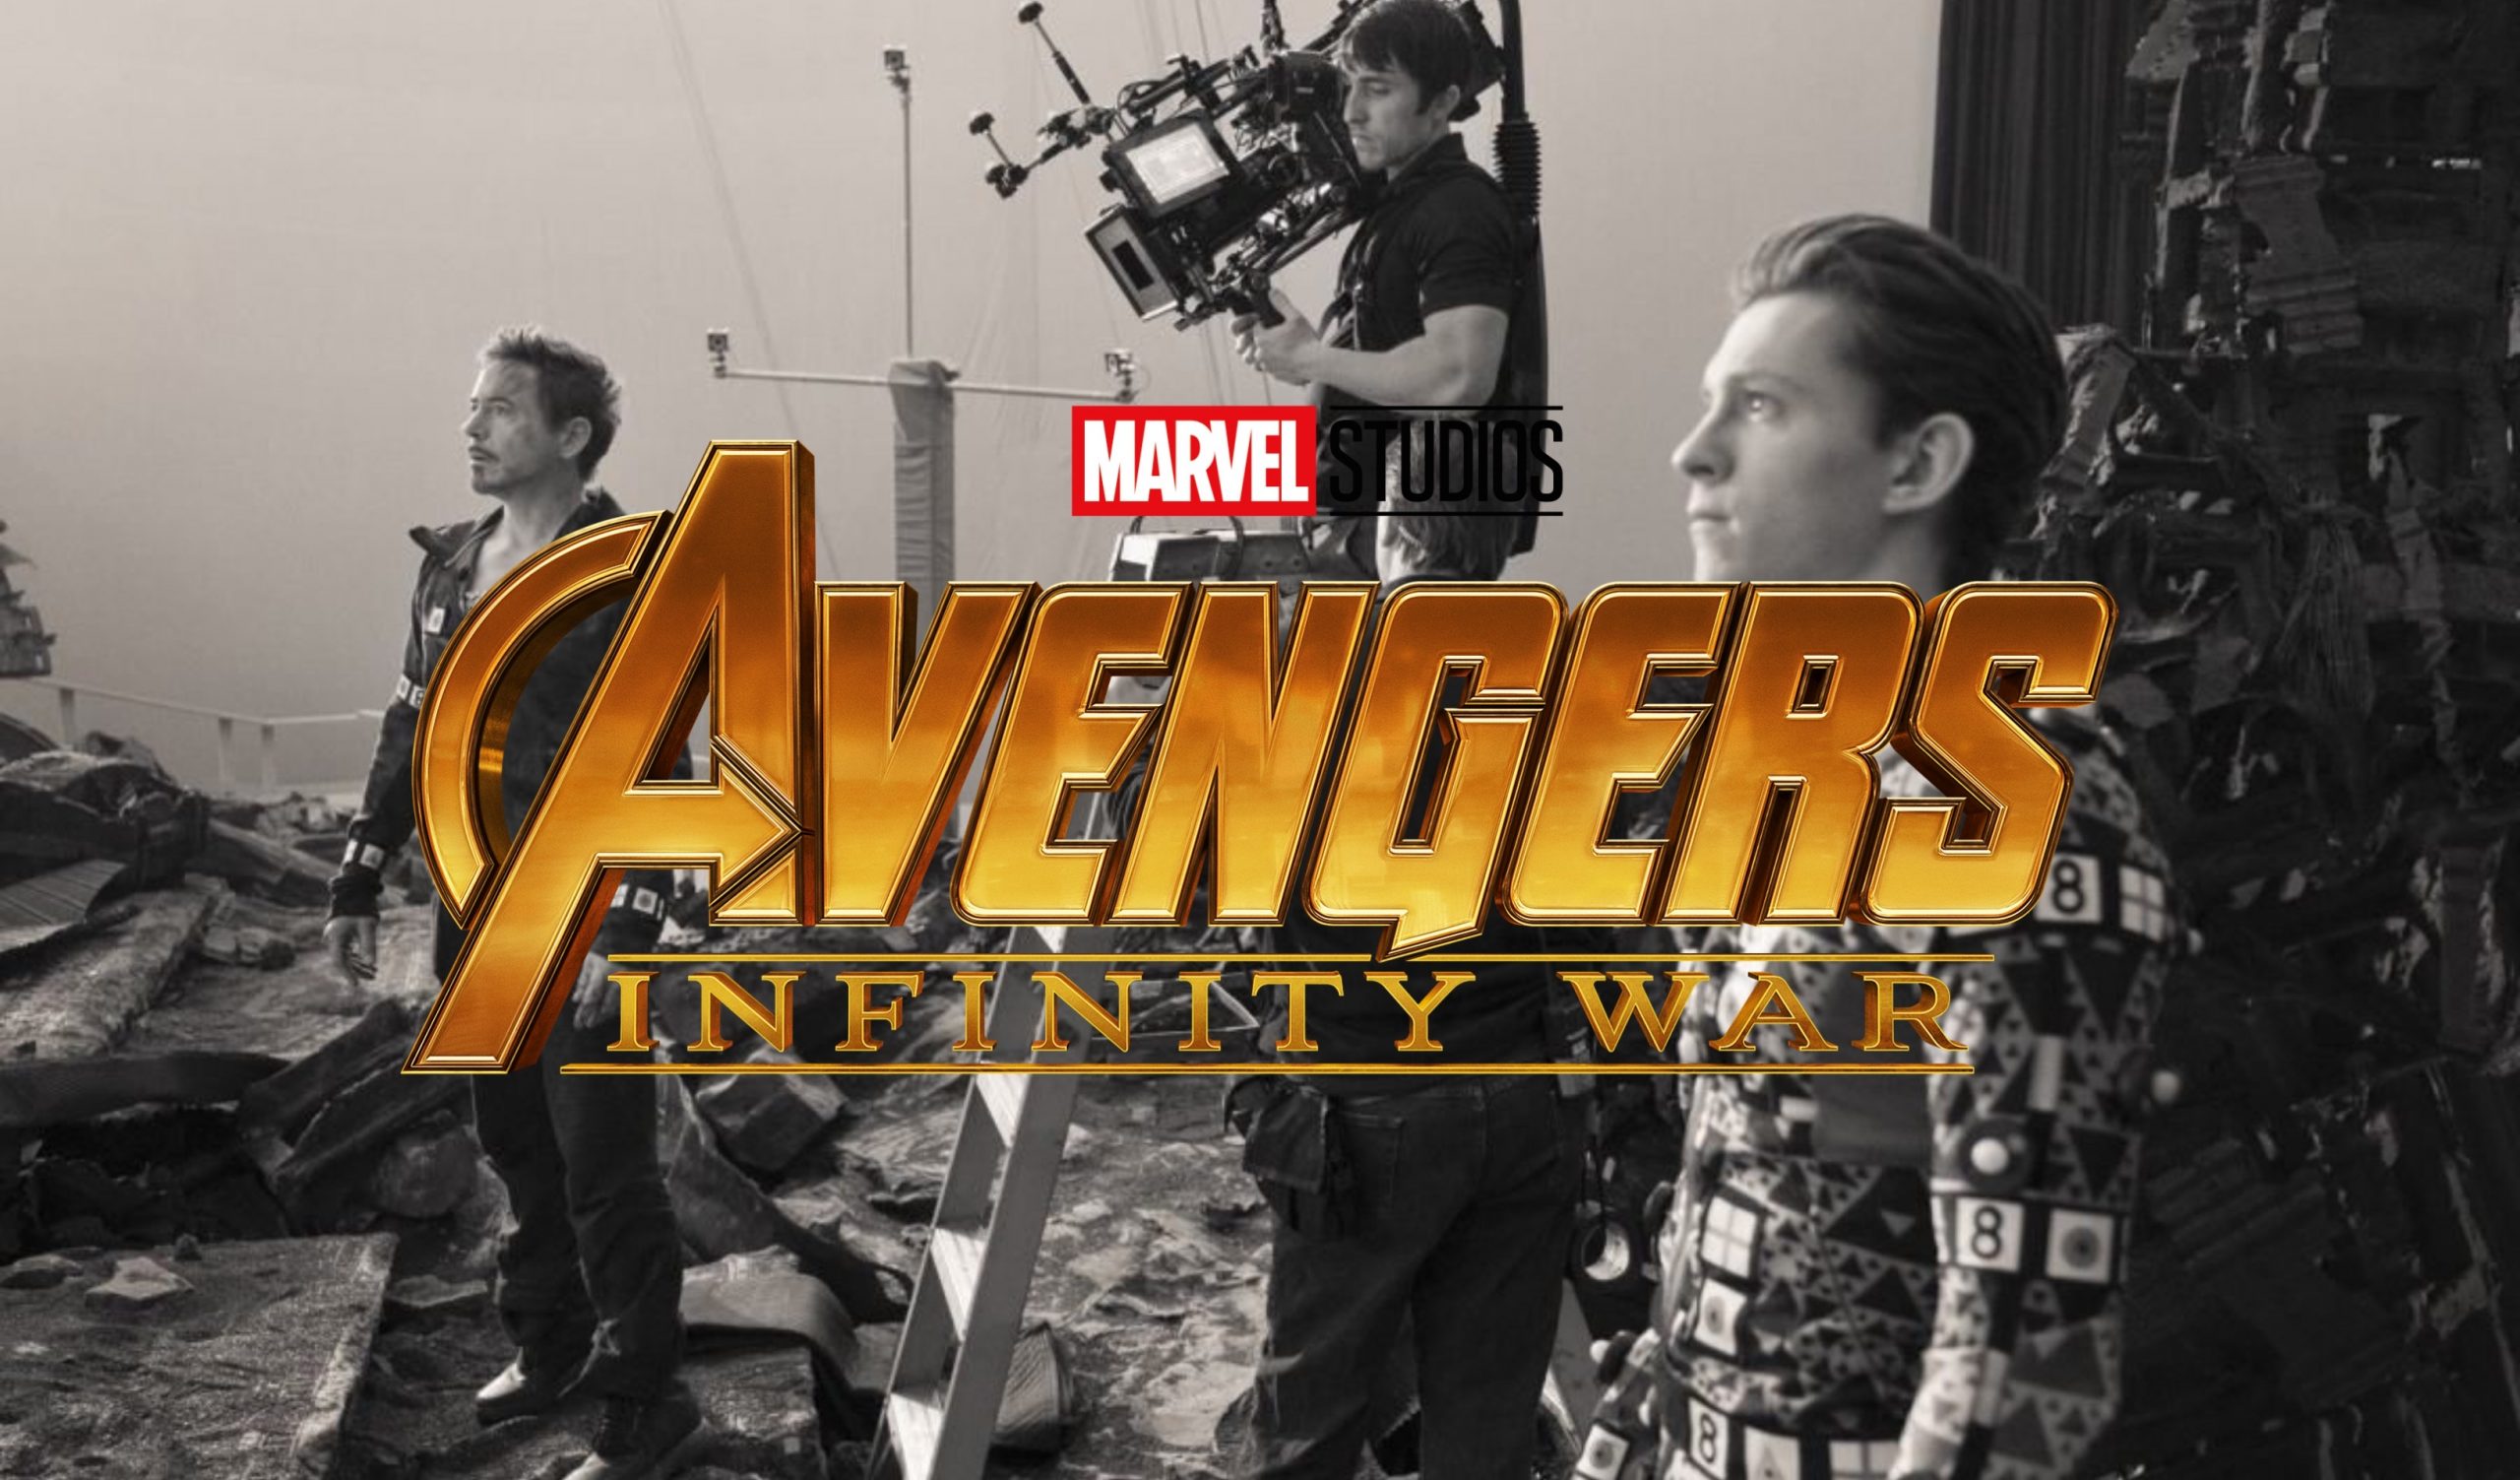 New Behind the Scenes Photos Revealed in Celebration of ‘Avengers: Infinity War’ Disney+ Debut